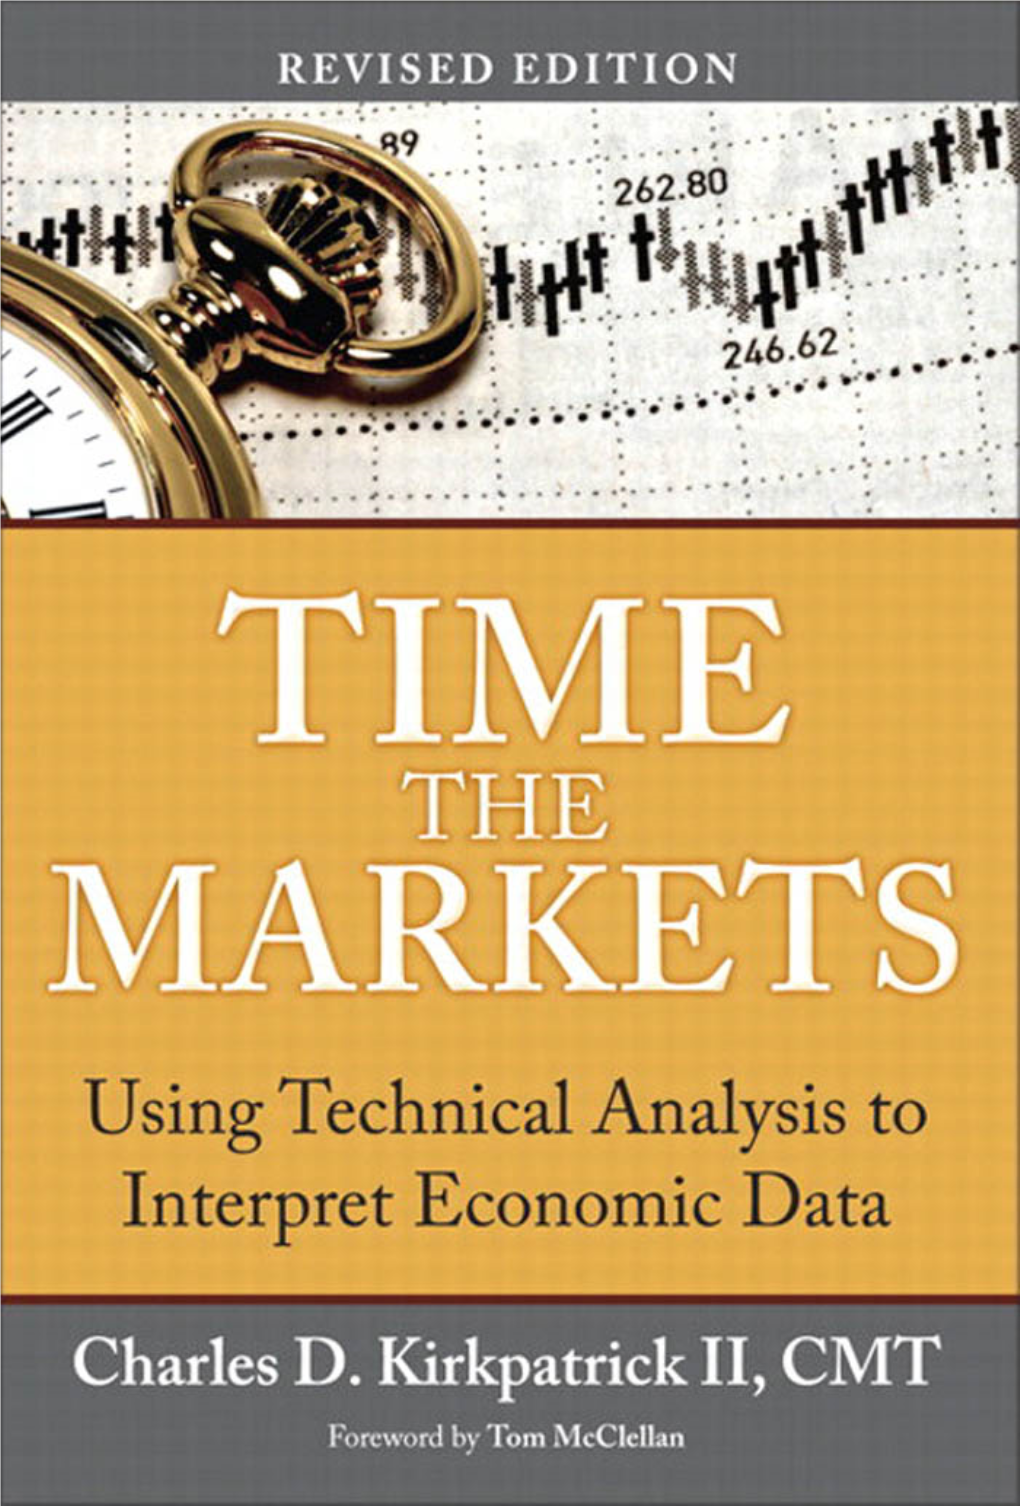 Time the Markets: Using Technical Analysis to Interpret Economic Data